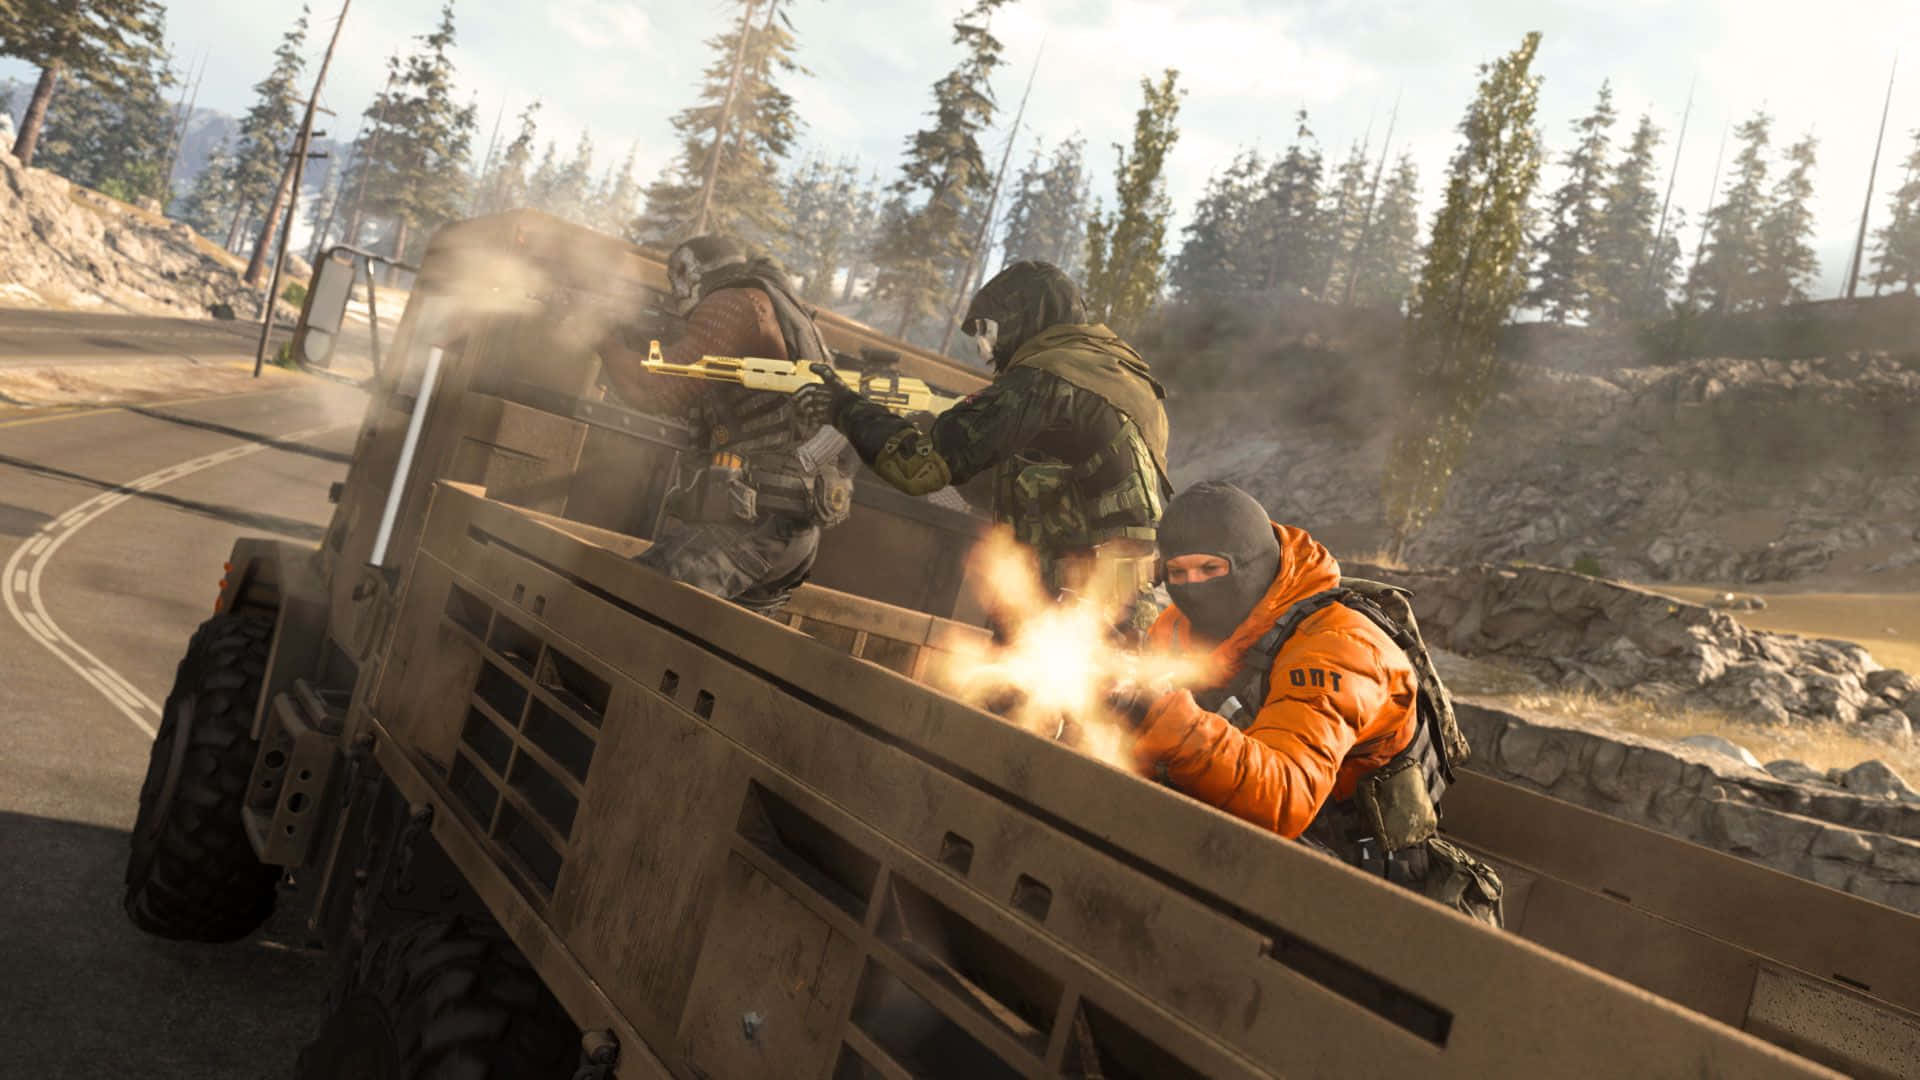 Intense Action on the Battlefield in Call of Duty with Tactical Vehicles Wallpaper